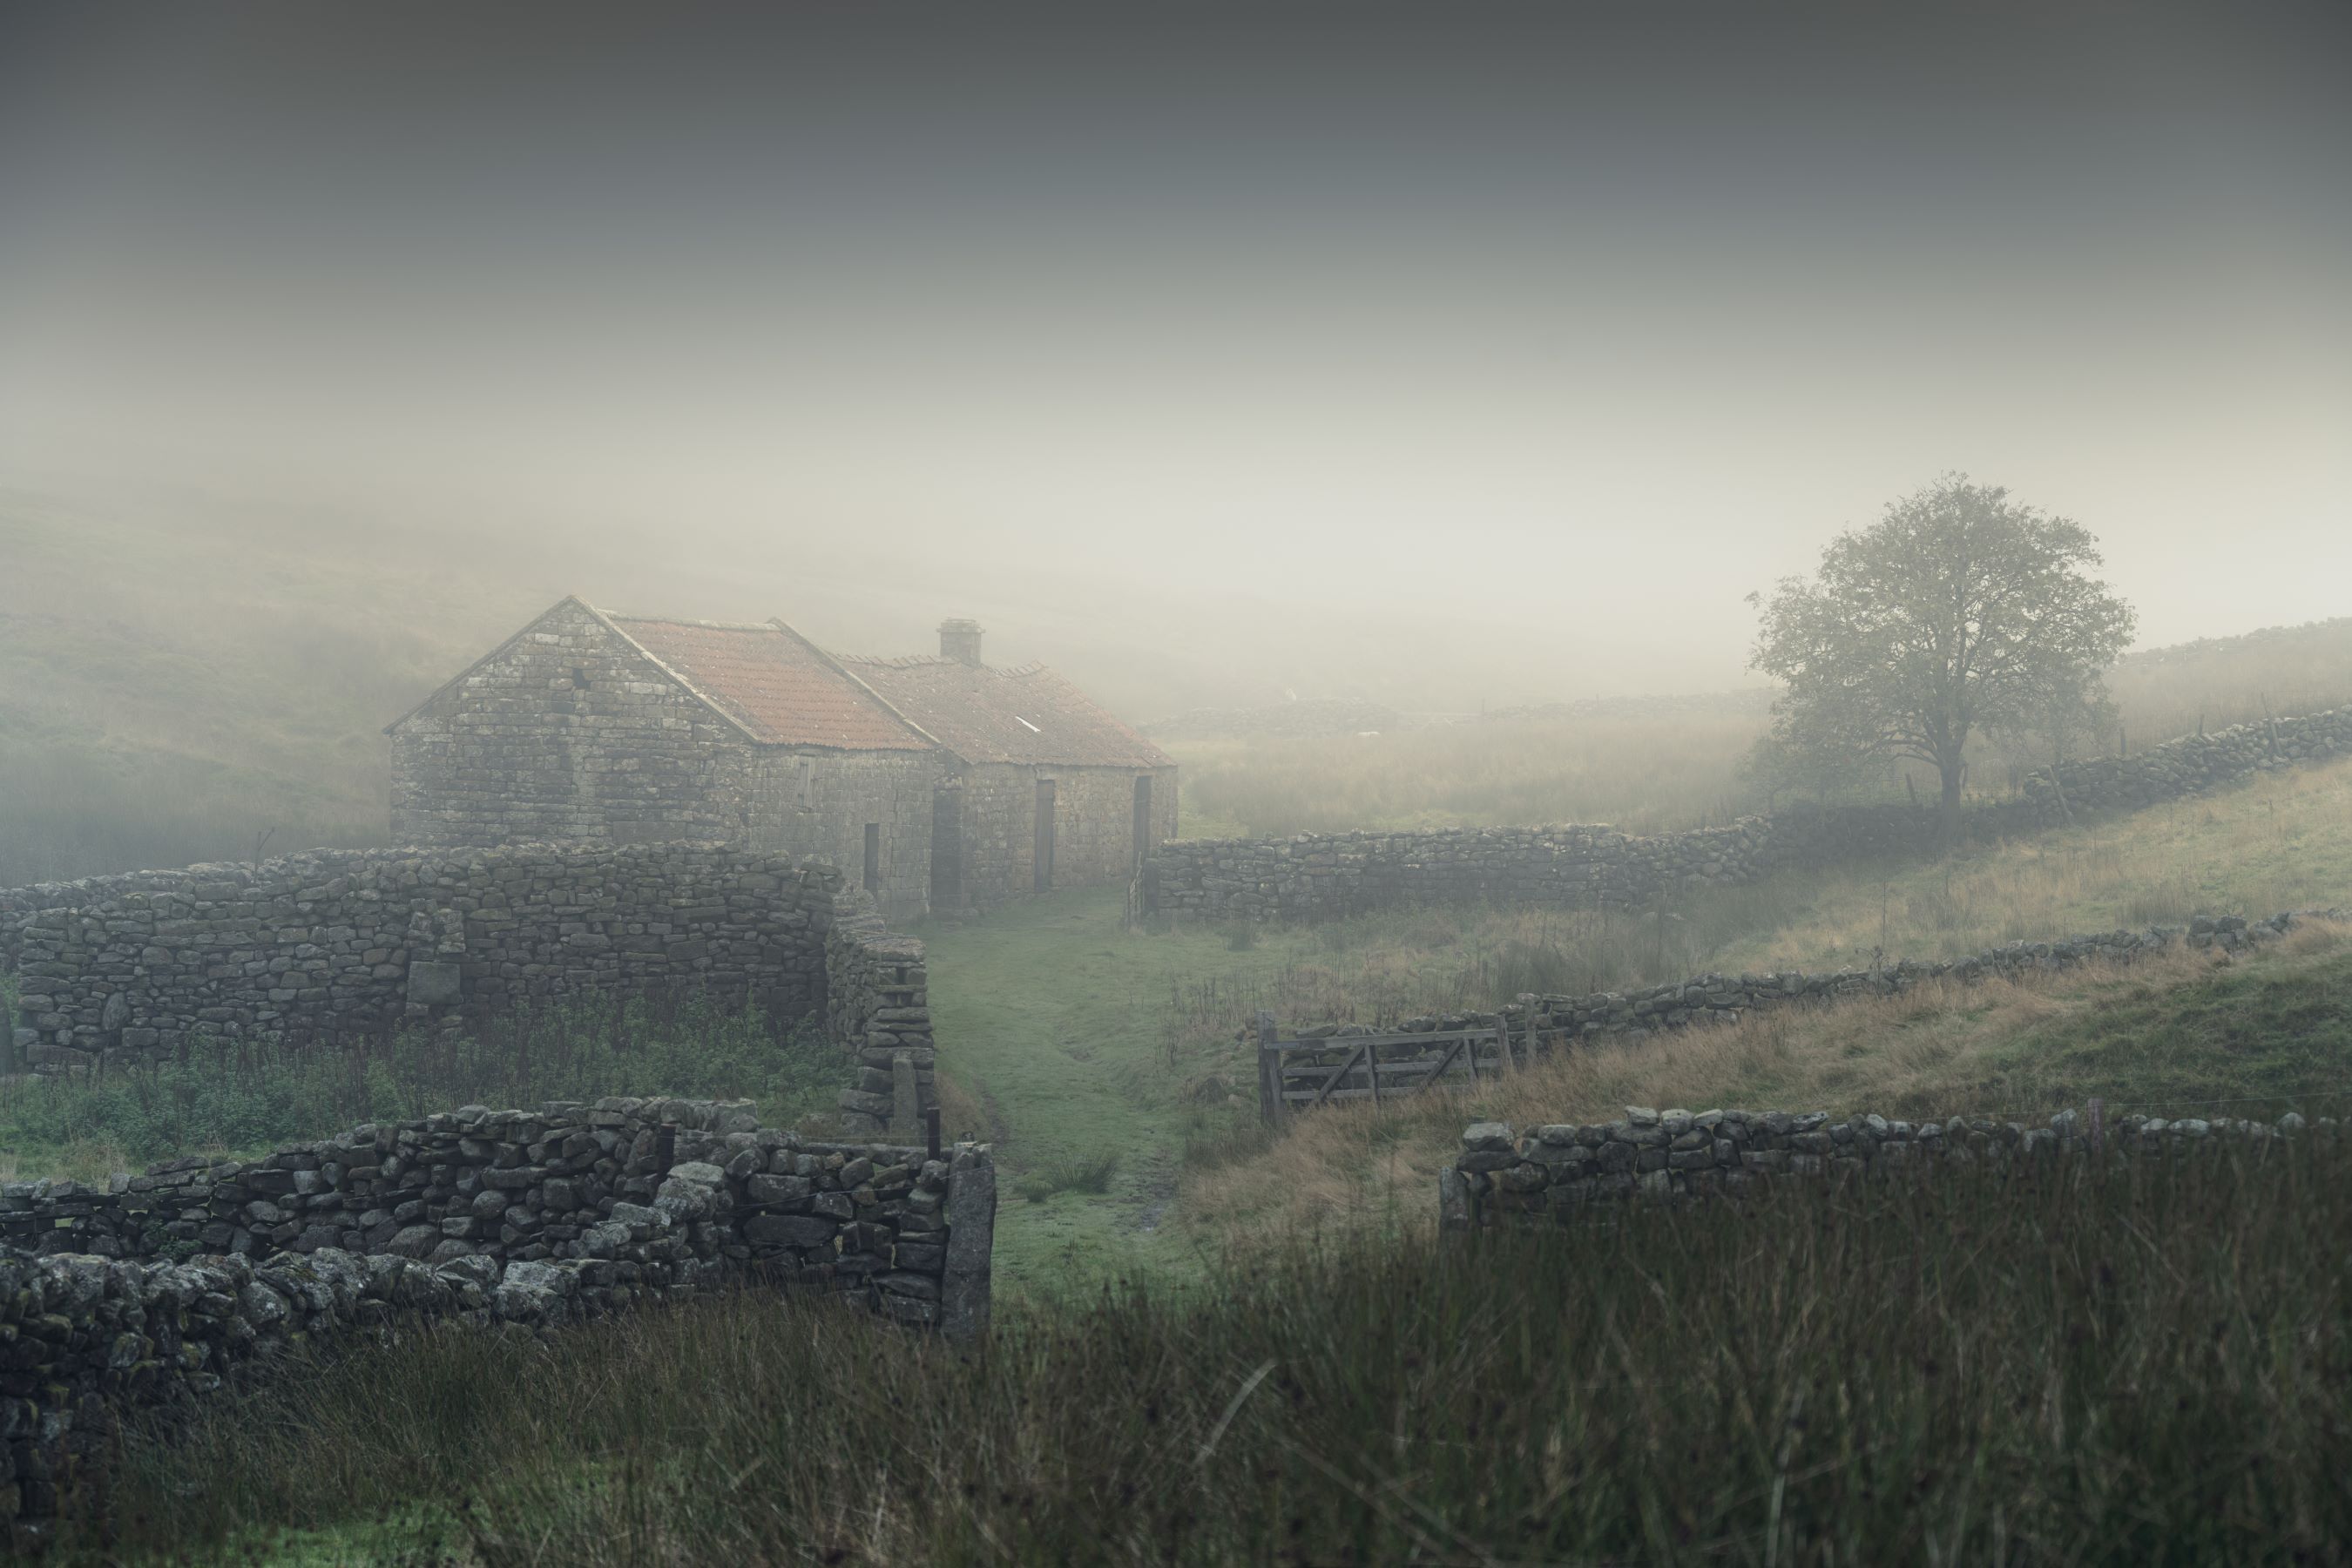 A moody, misty photo of an old stone outbuilding in the countryside